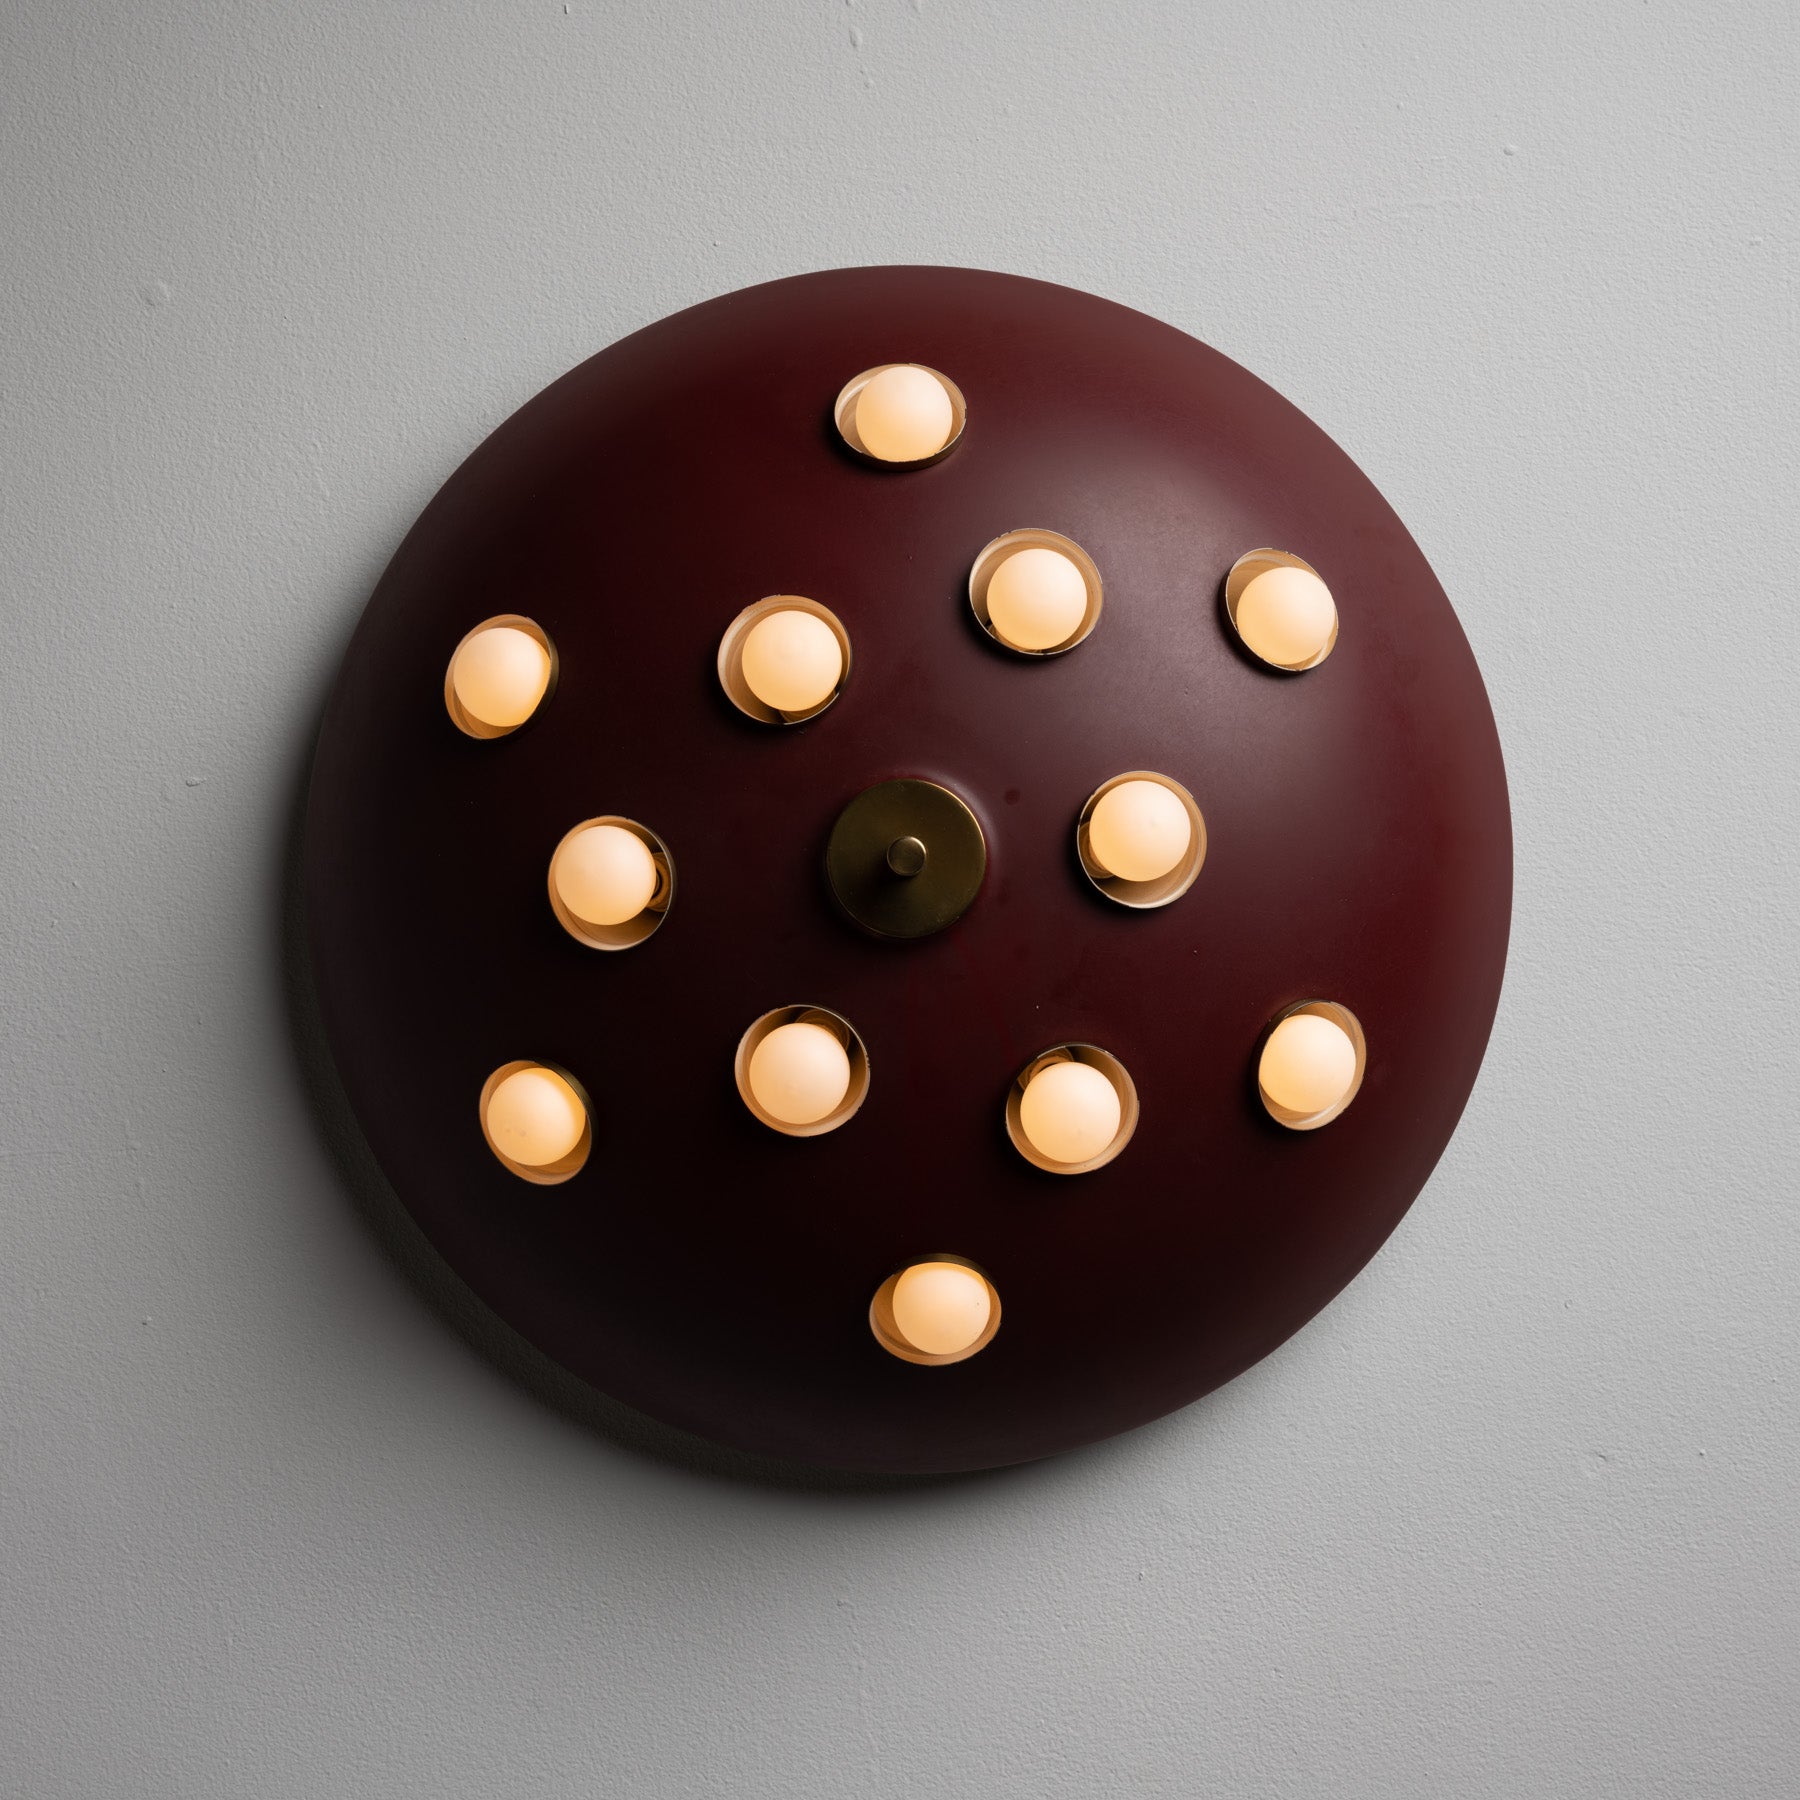 Ceiling Light by Oscar Torlasco for Lumi. Designed and Manufactured in Italy, circa the 1960s. Painted with spotted light sockets throughout the disk. Rewired for US standards. Takes twelve E27 40 watts max bulbs. Bulbs provided as a one time